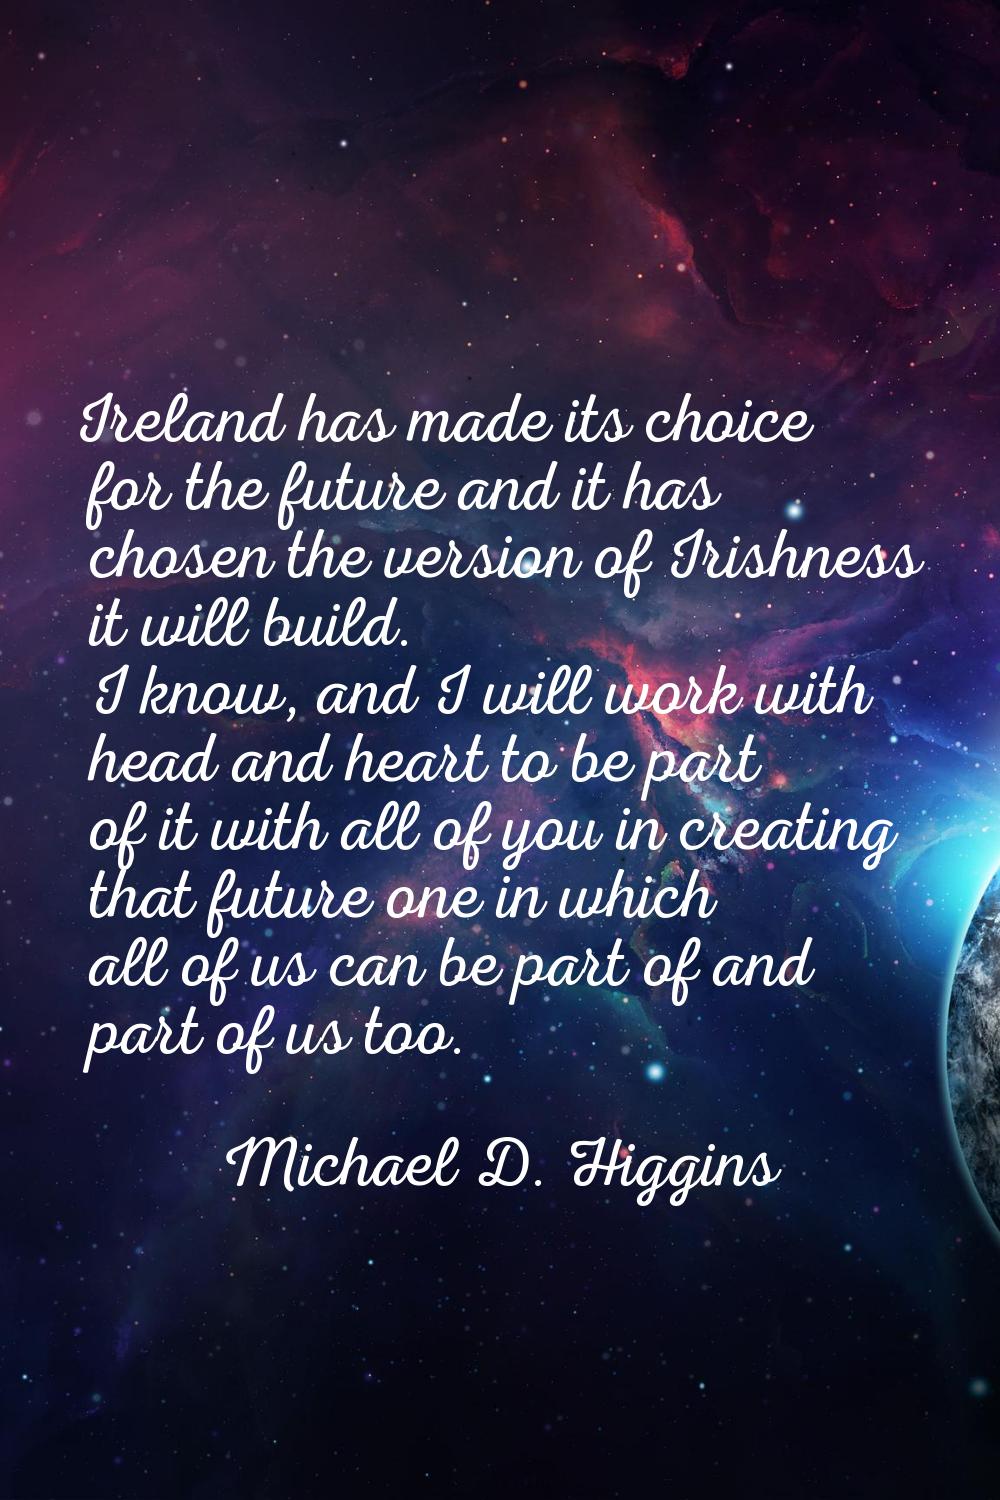 Ireland has made its choice for the future and it has chosen the version of Irishness it will build